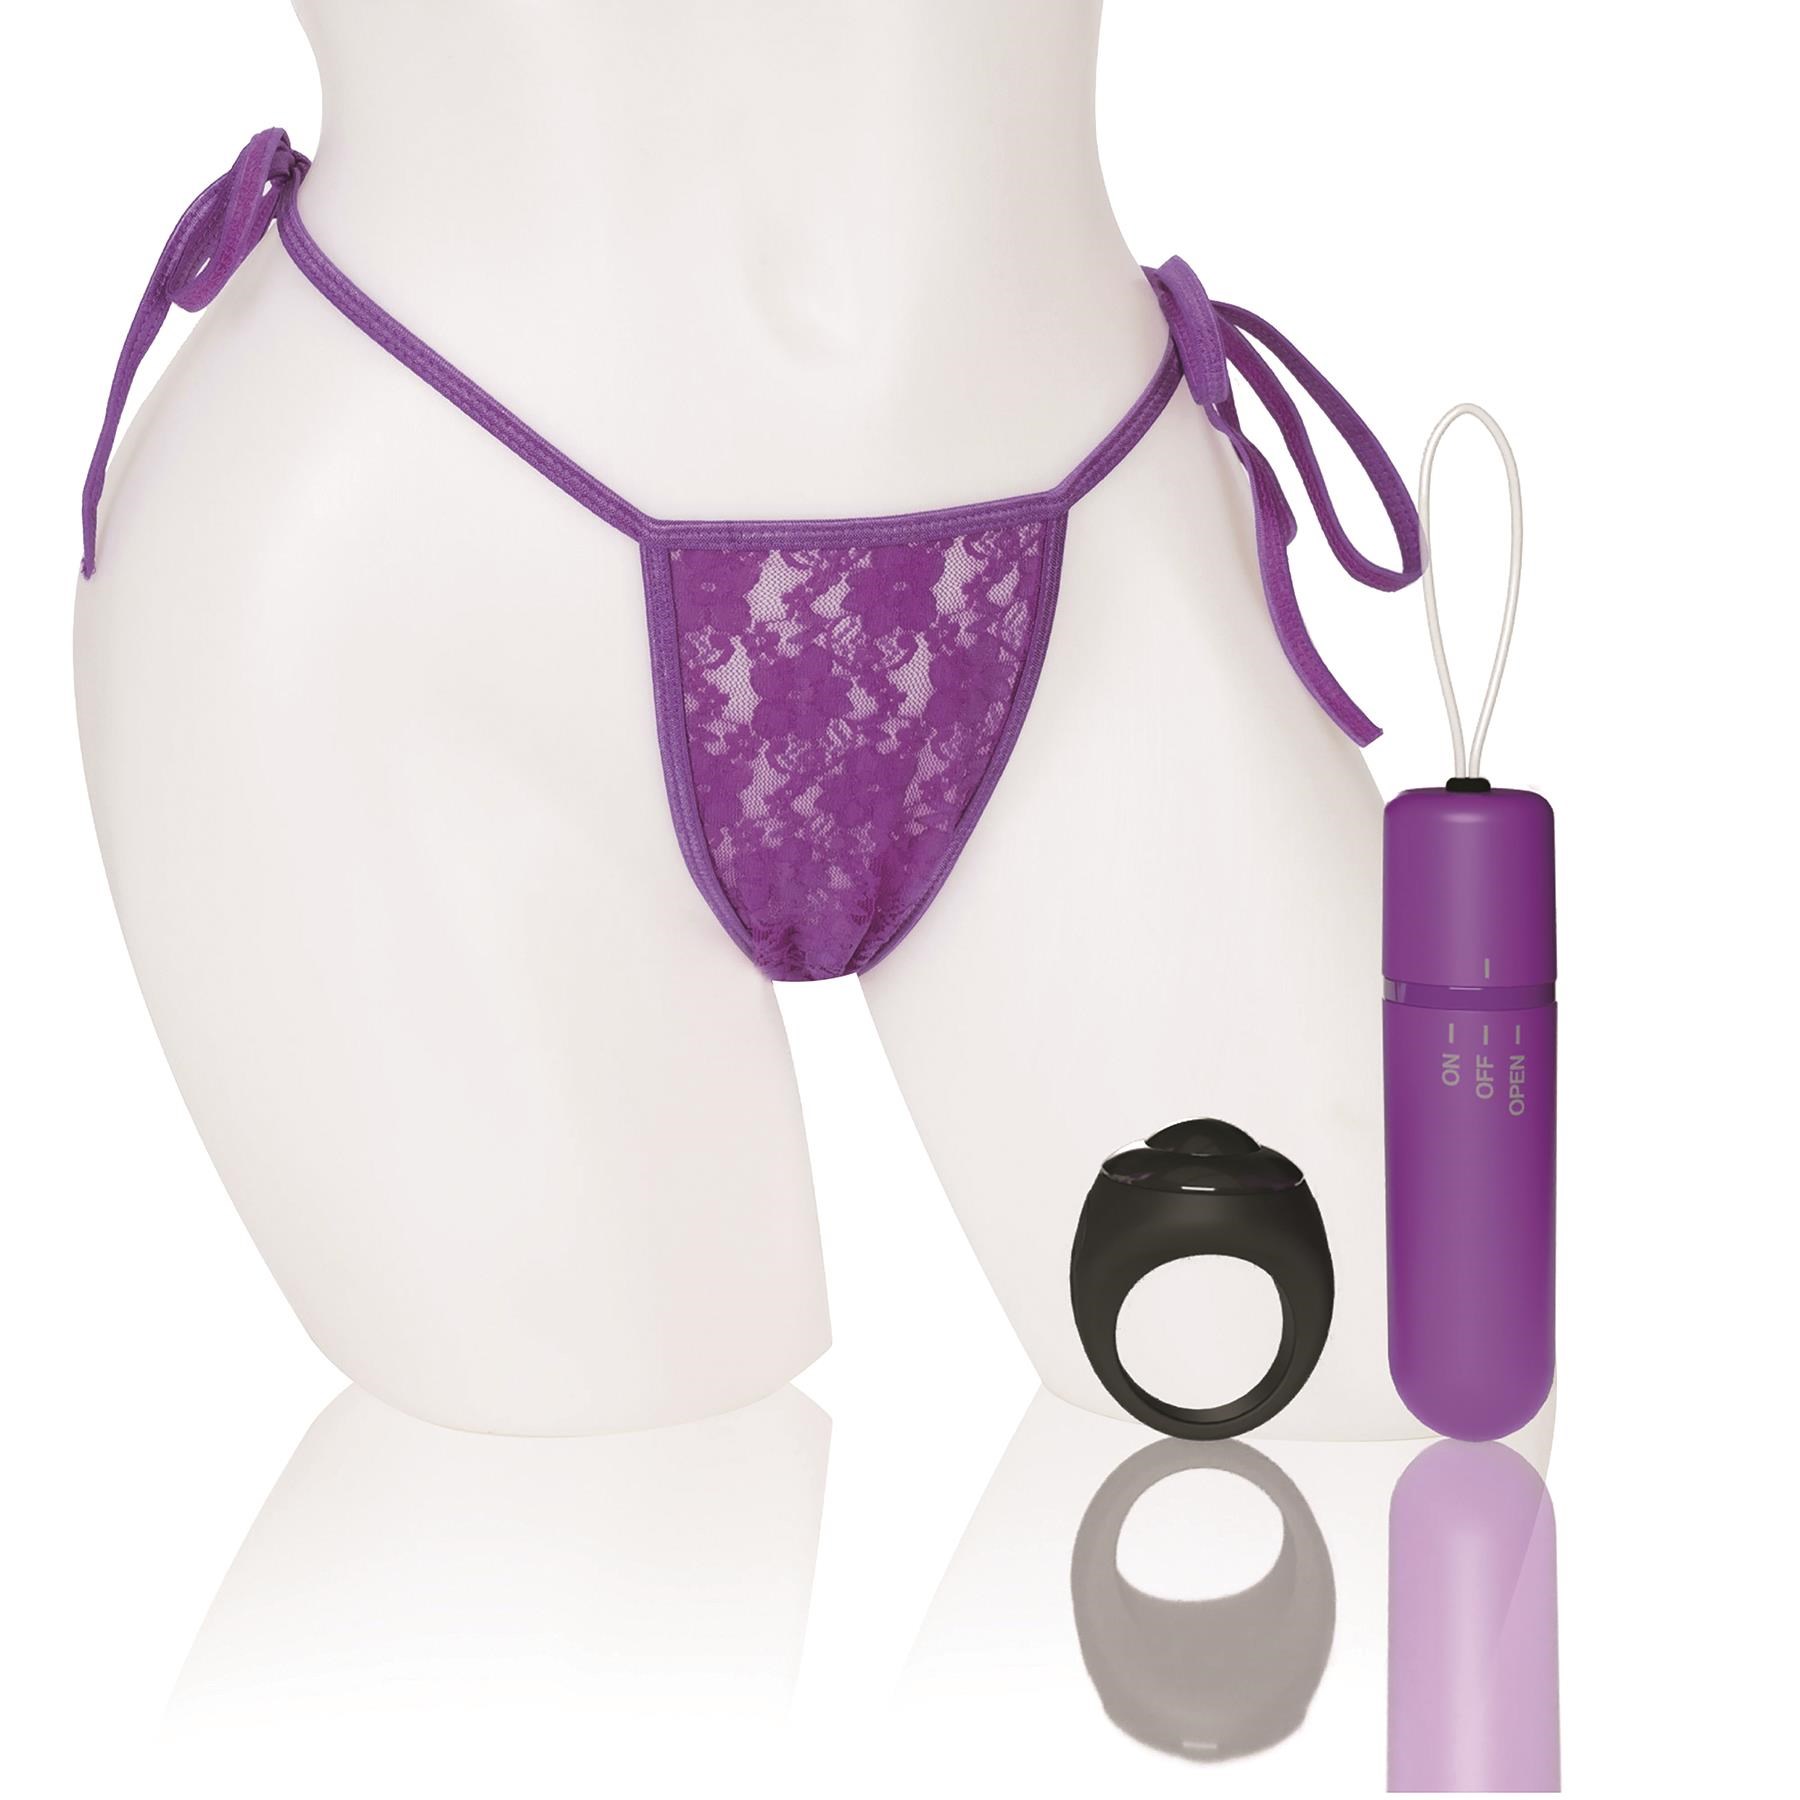 Screaming O Remote Control Vibrating Panty Set - Product and Panty - Purple